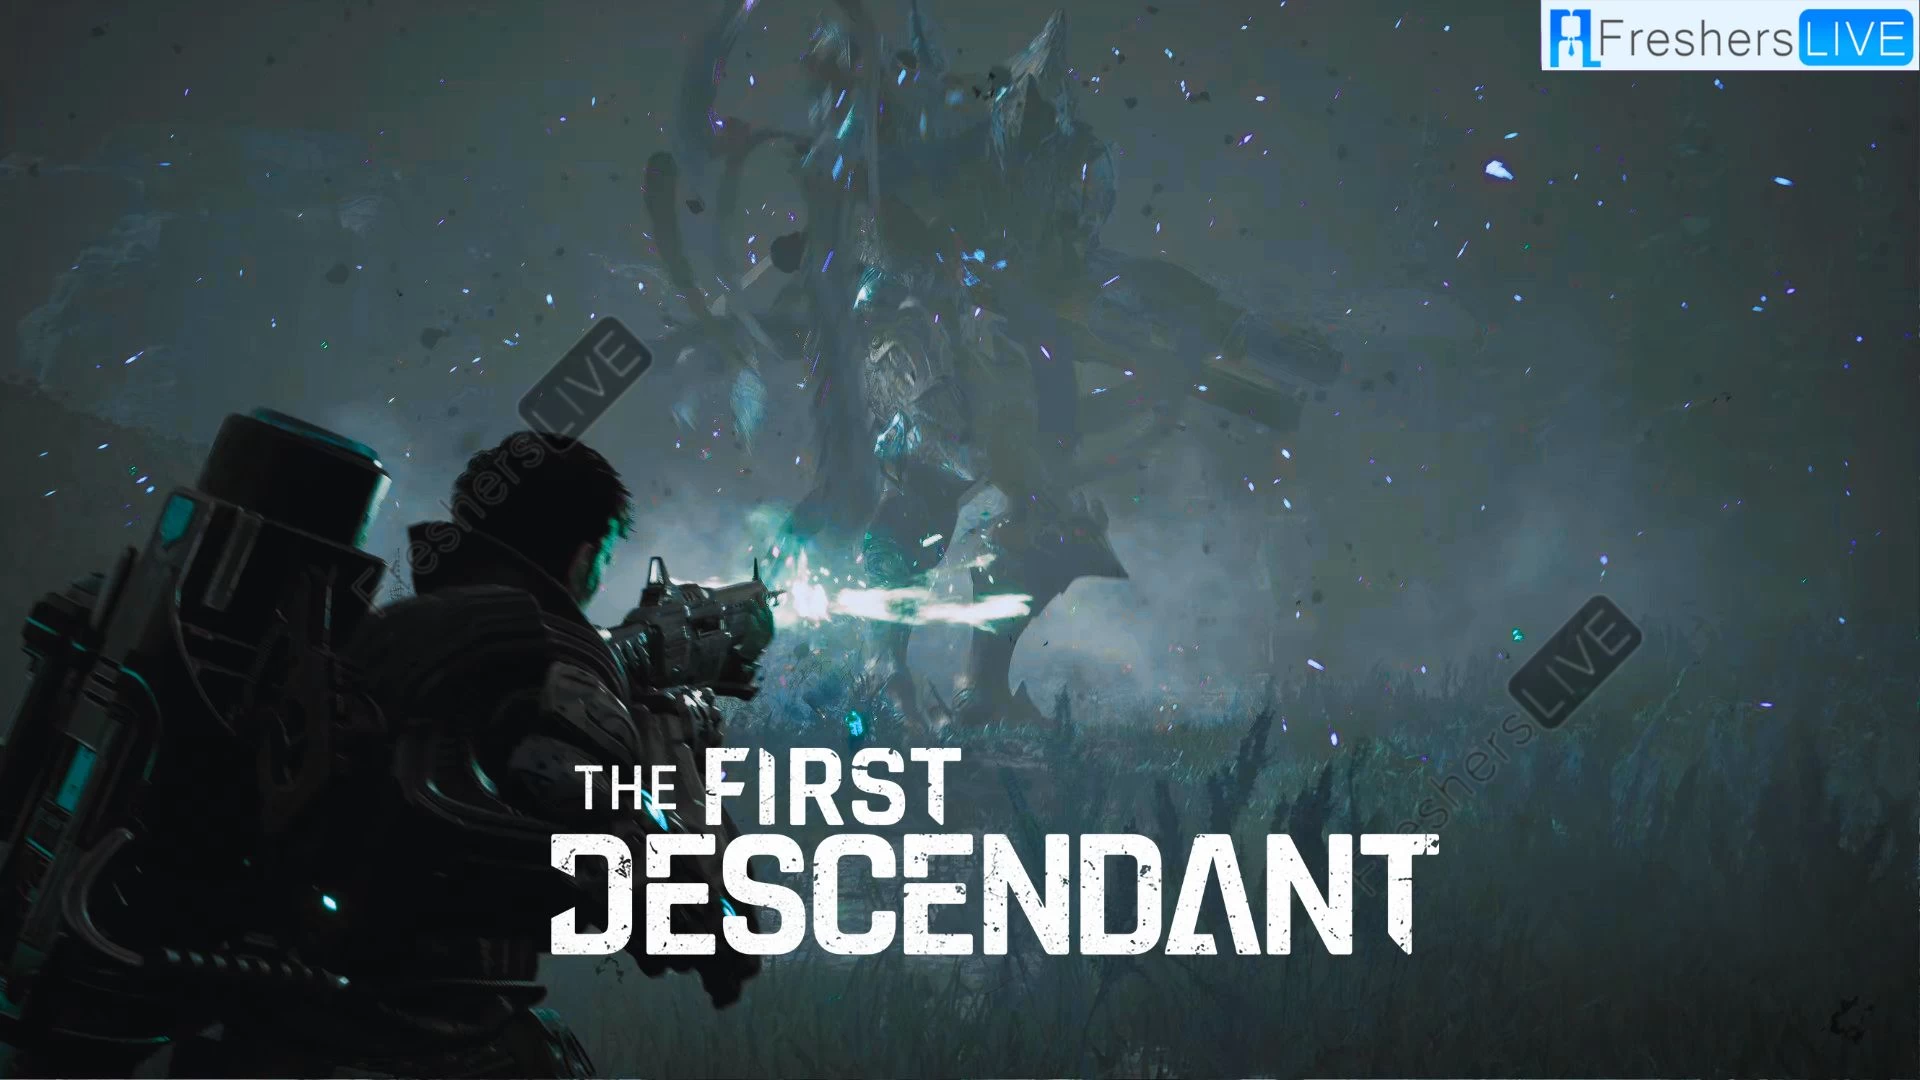 The First Descendant Not Launching How to Fix the First Descendant Not Launching?